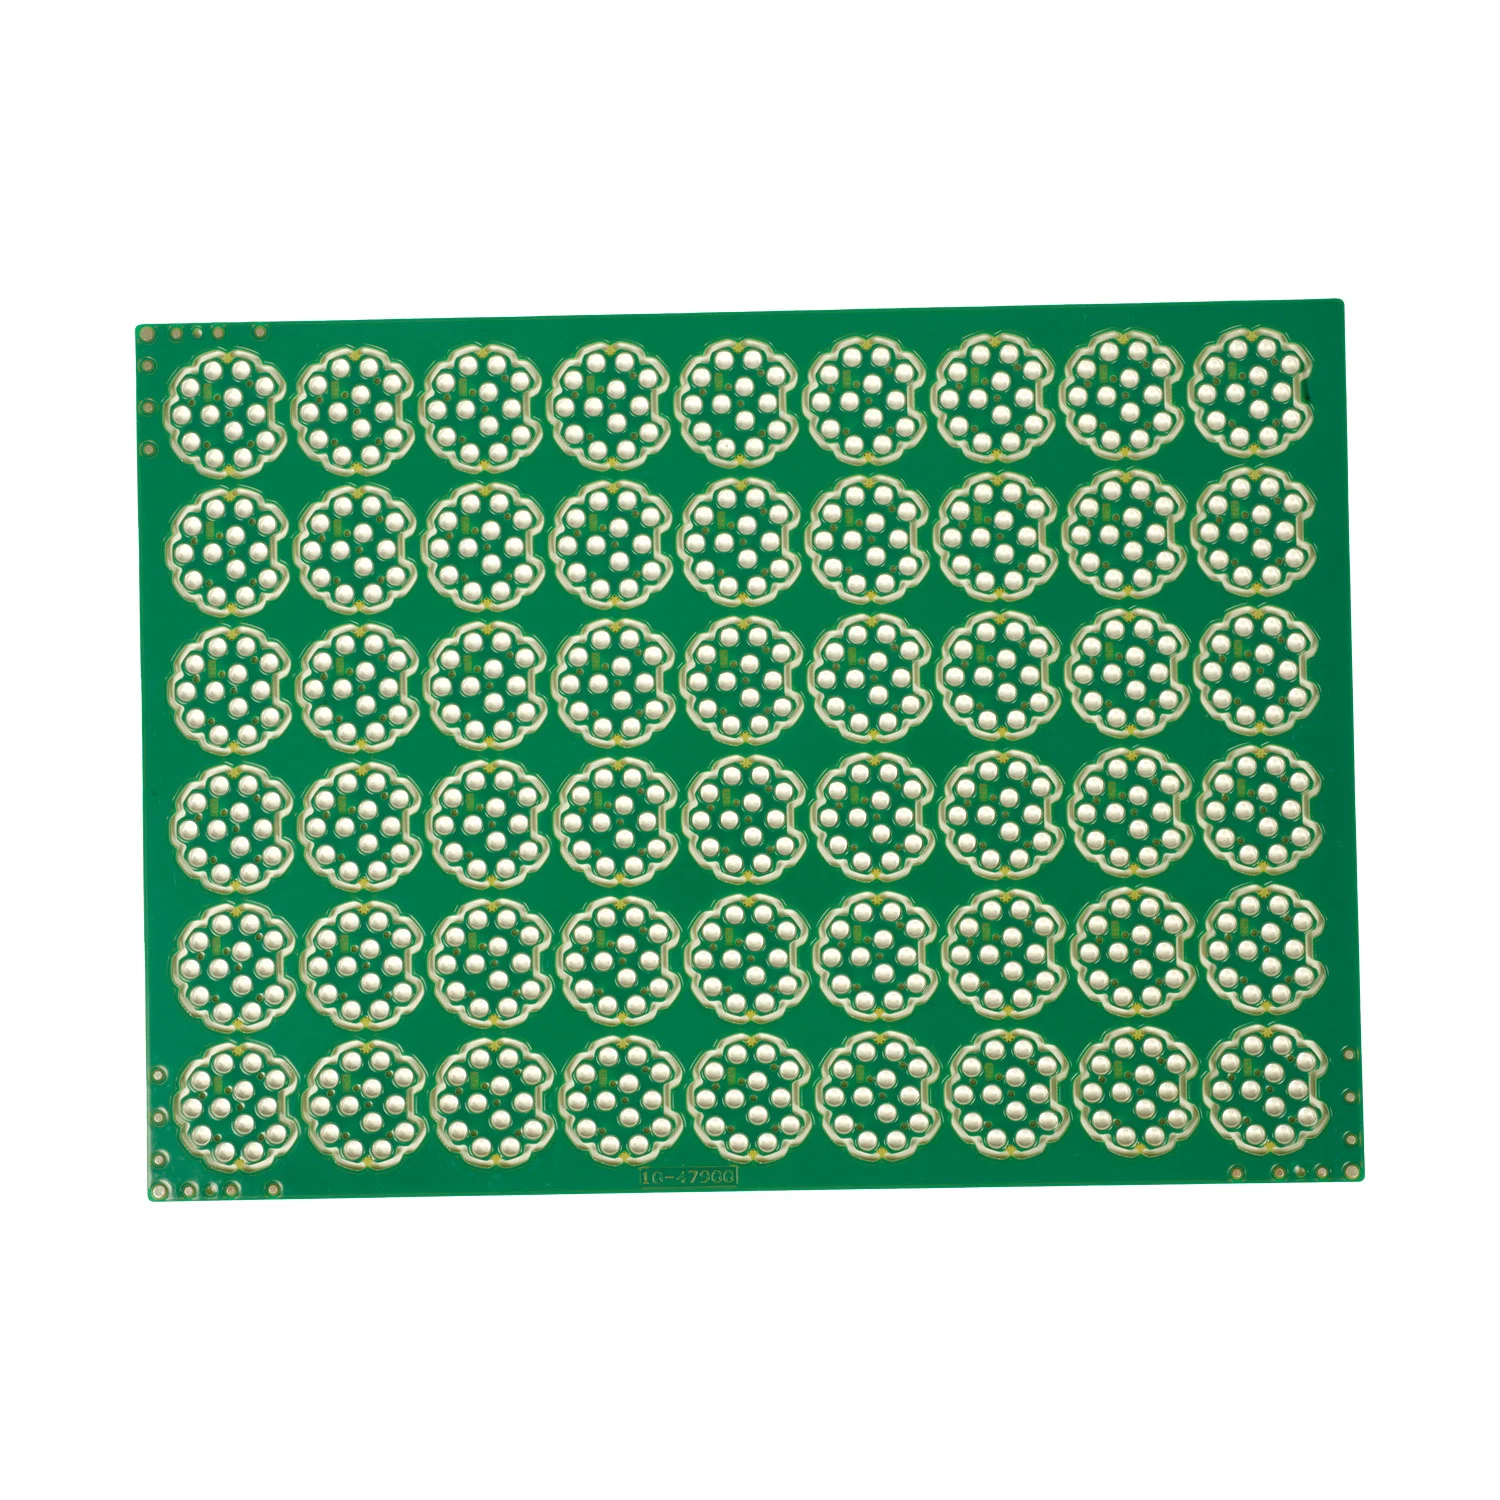 Other PCB Assemble PCBA Circuit Boards Manufacturer Fabrication WiFi Consumer Electronics